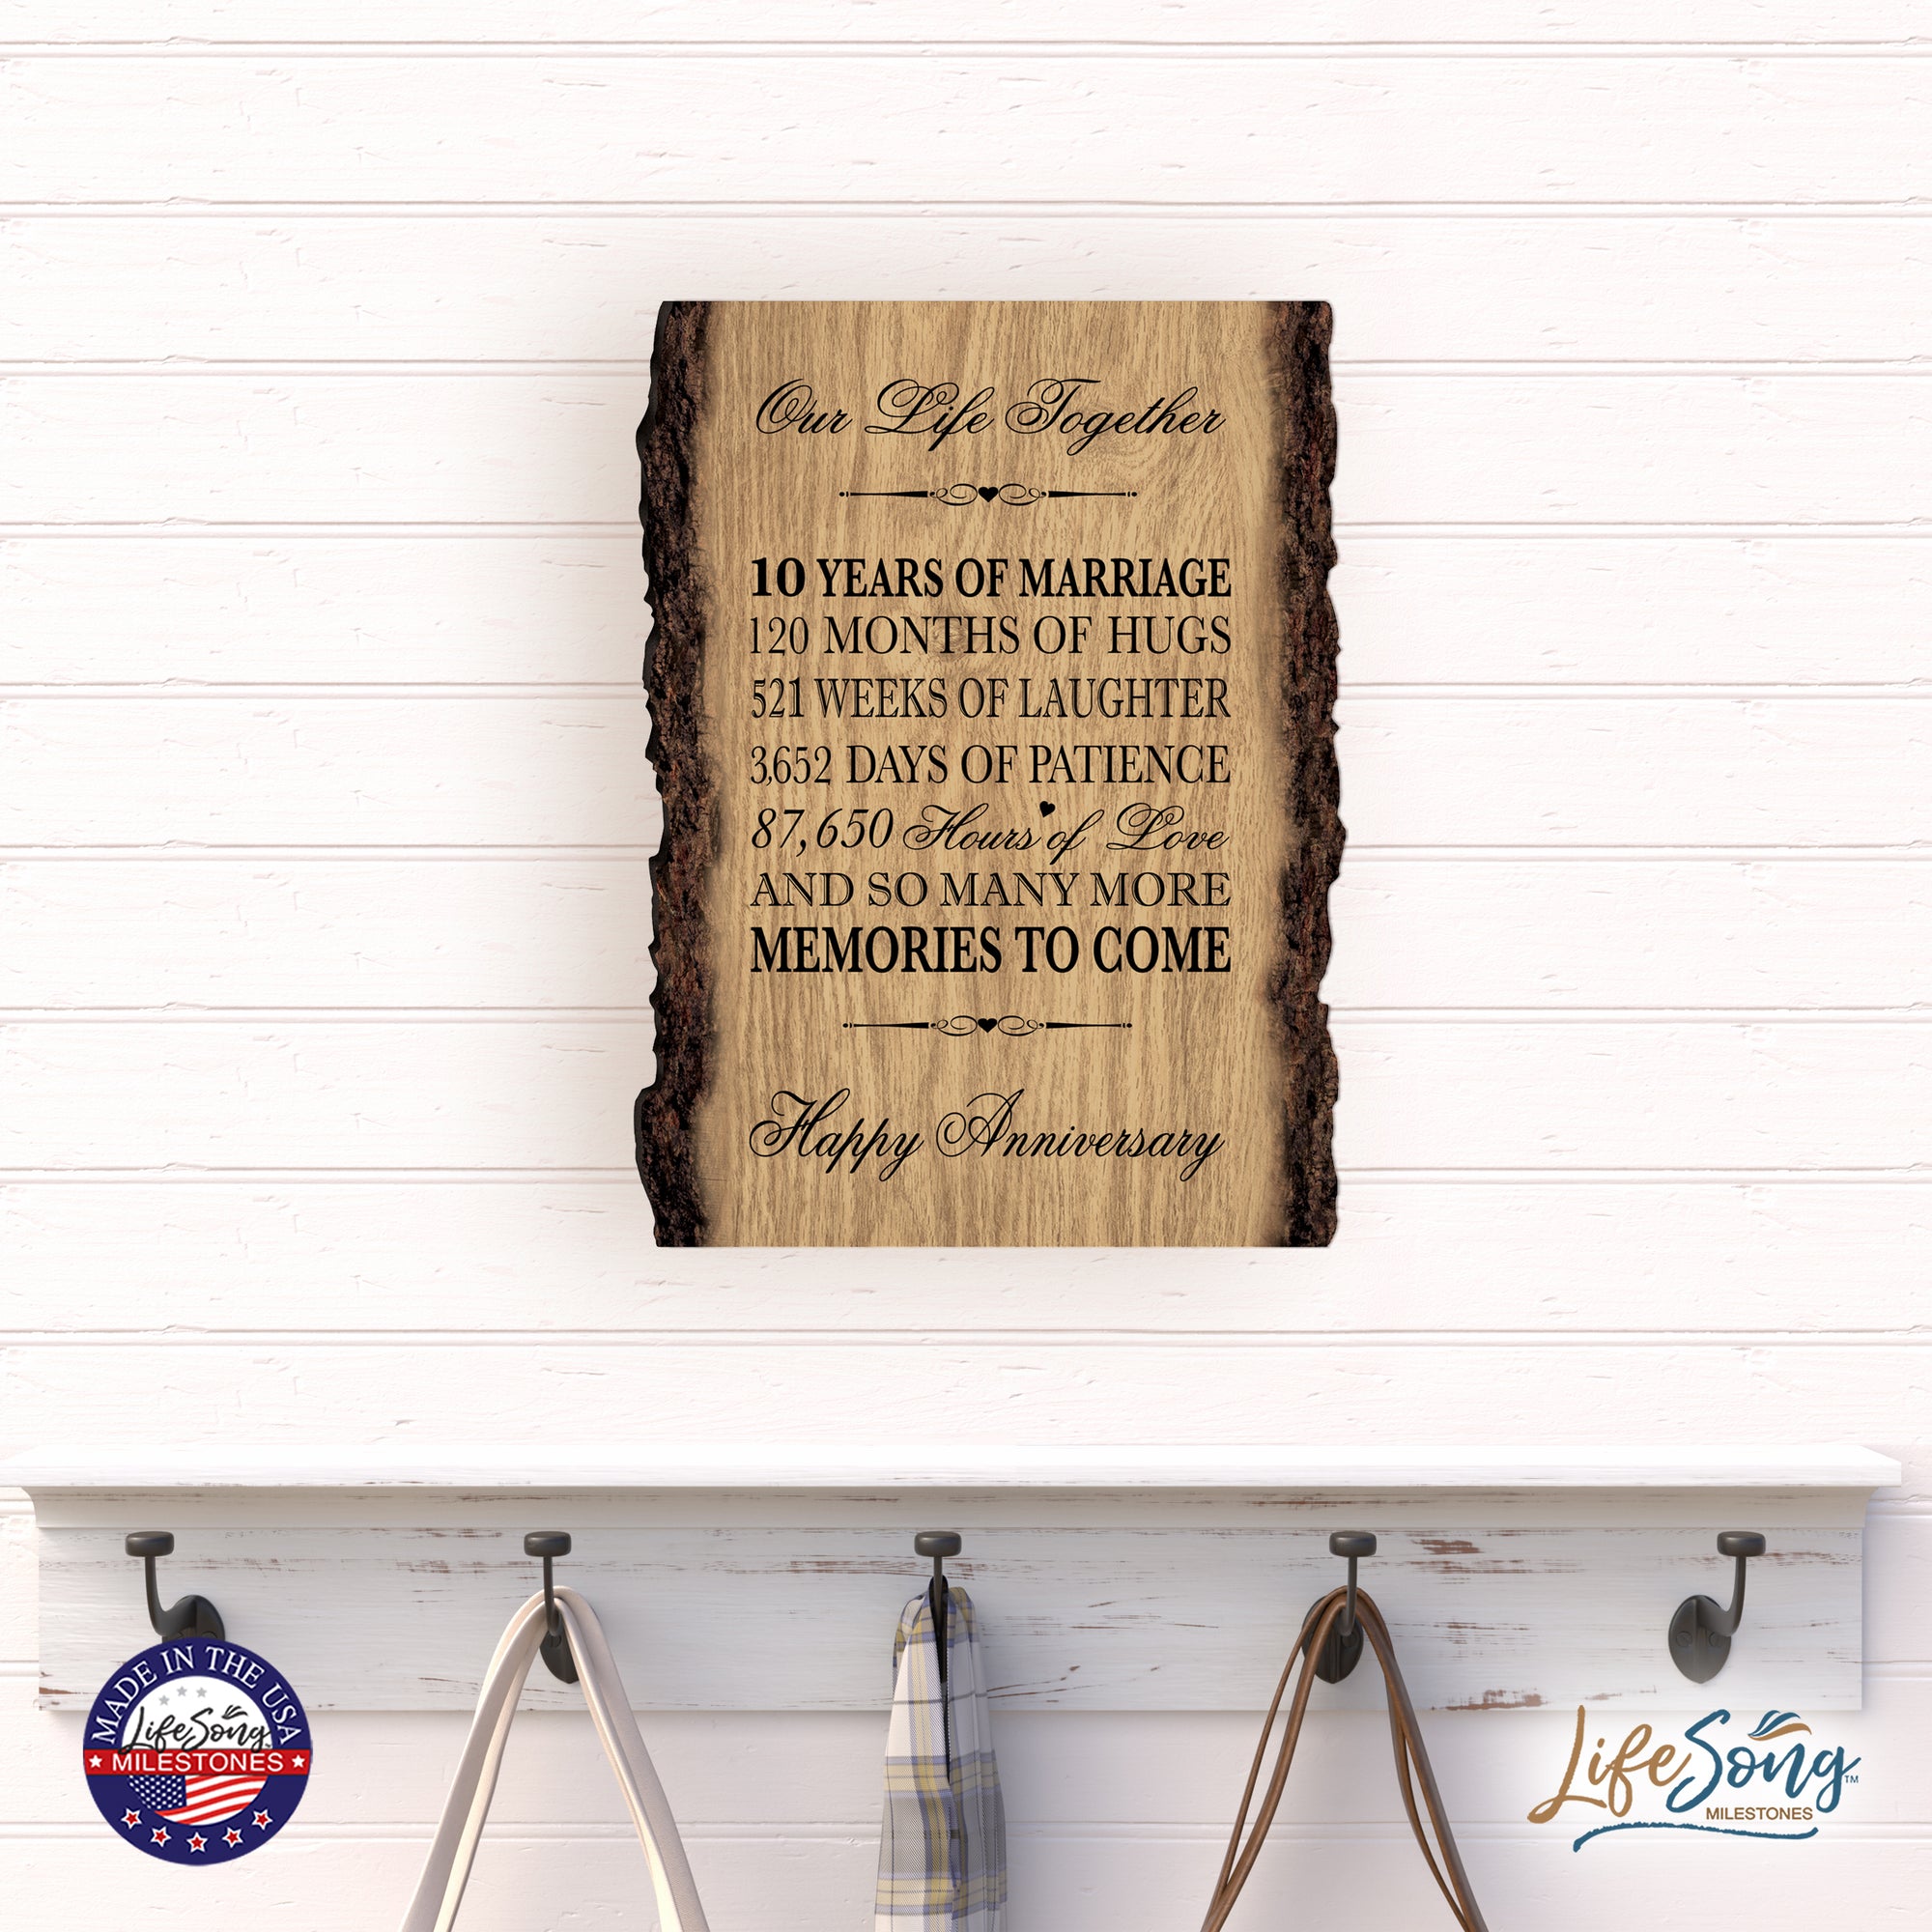 Rustic Wedding Anniversary 9x12 Barky Wall Plaque Gift For Parents, Grandparents New Couple - 10 Years Of Marriage